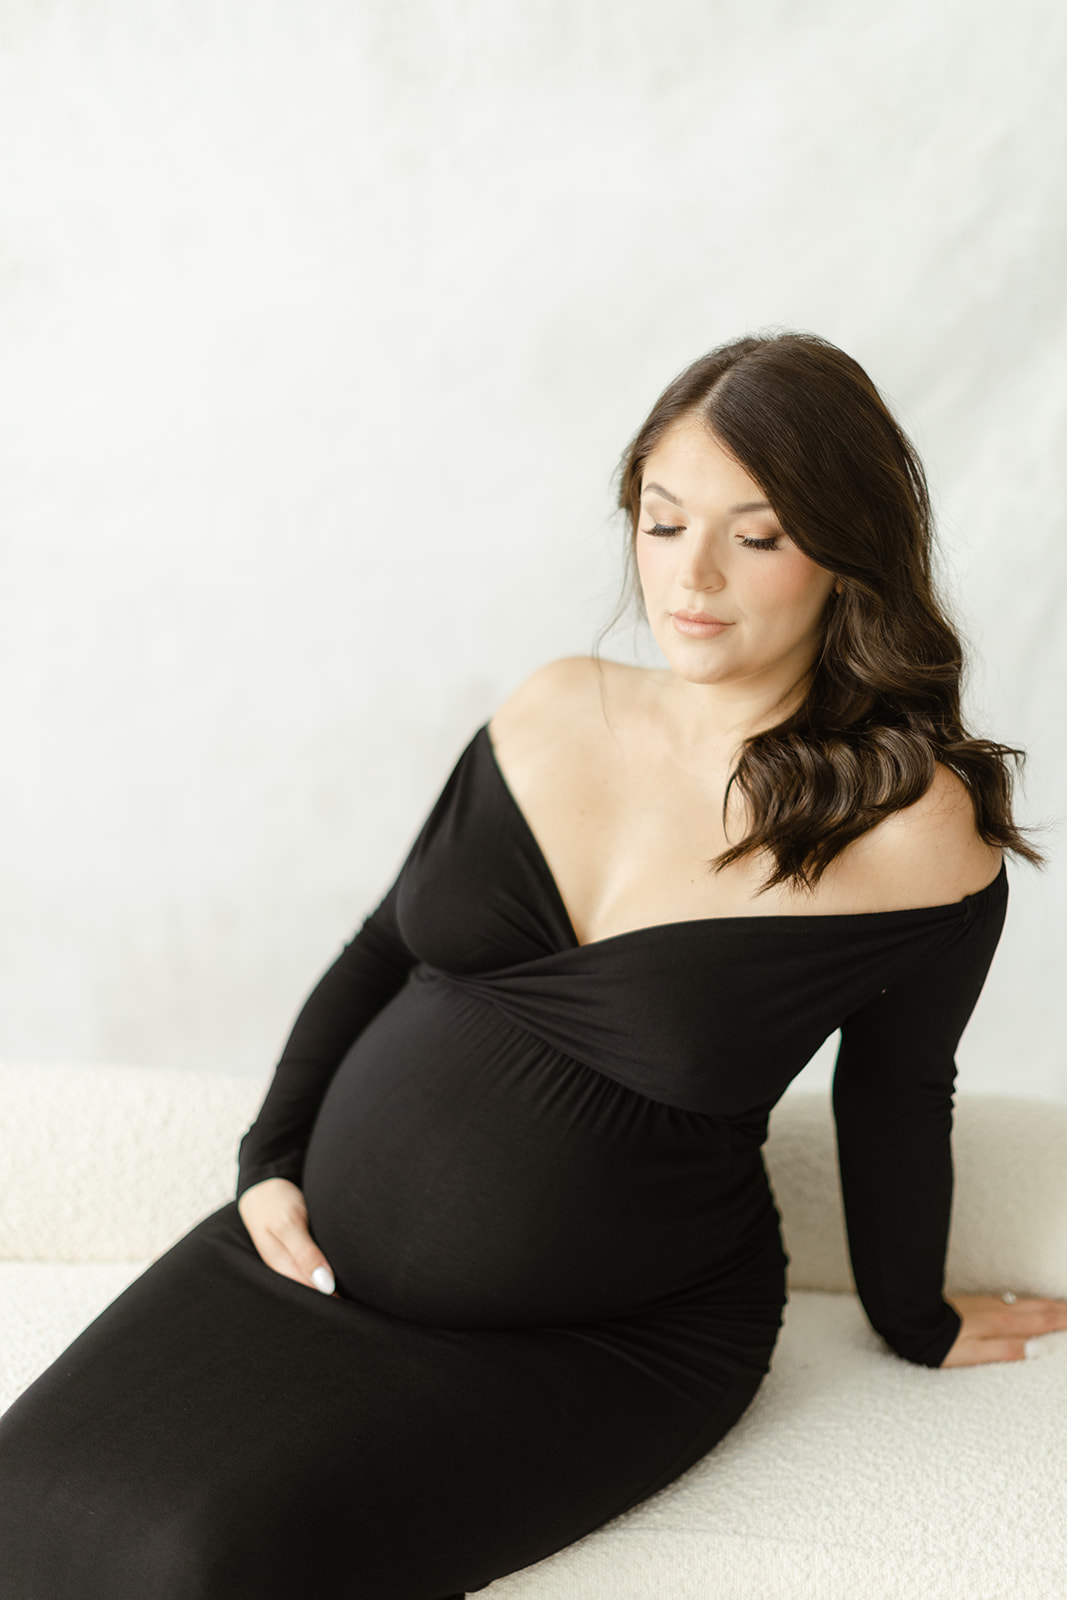 A mom to be in a black maternity gown sits on a bench in a studio leaning back on one arm thanks to Fertility Acupuncture Dallas